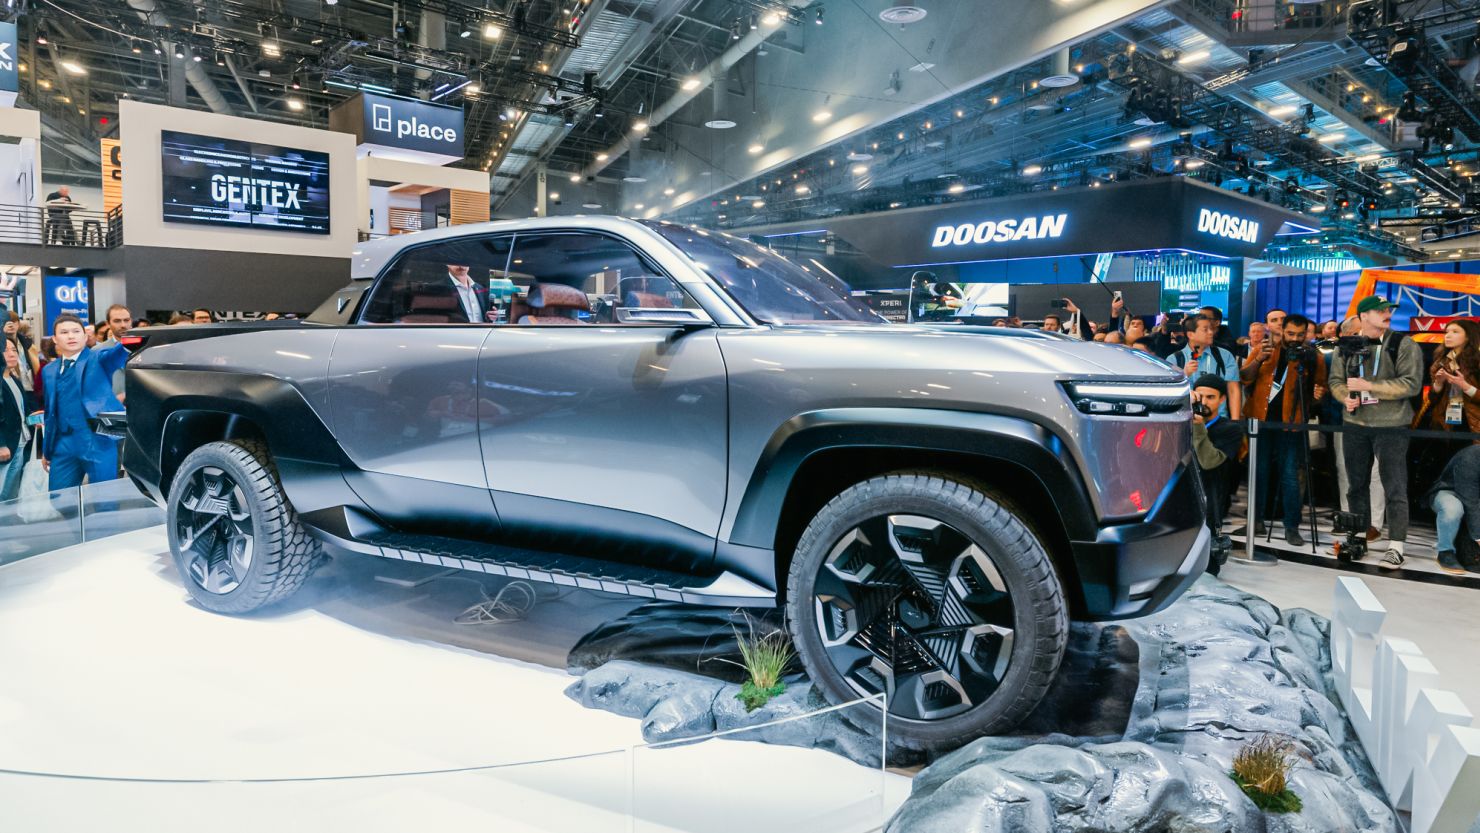 VinFast unveiling an electric pickup and a subcompact SUV at CES.